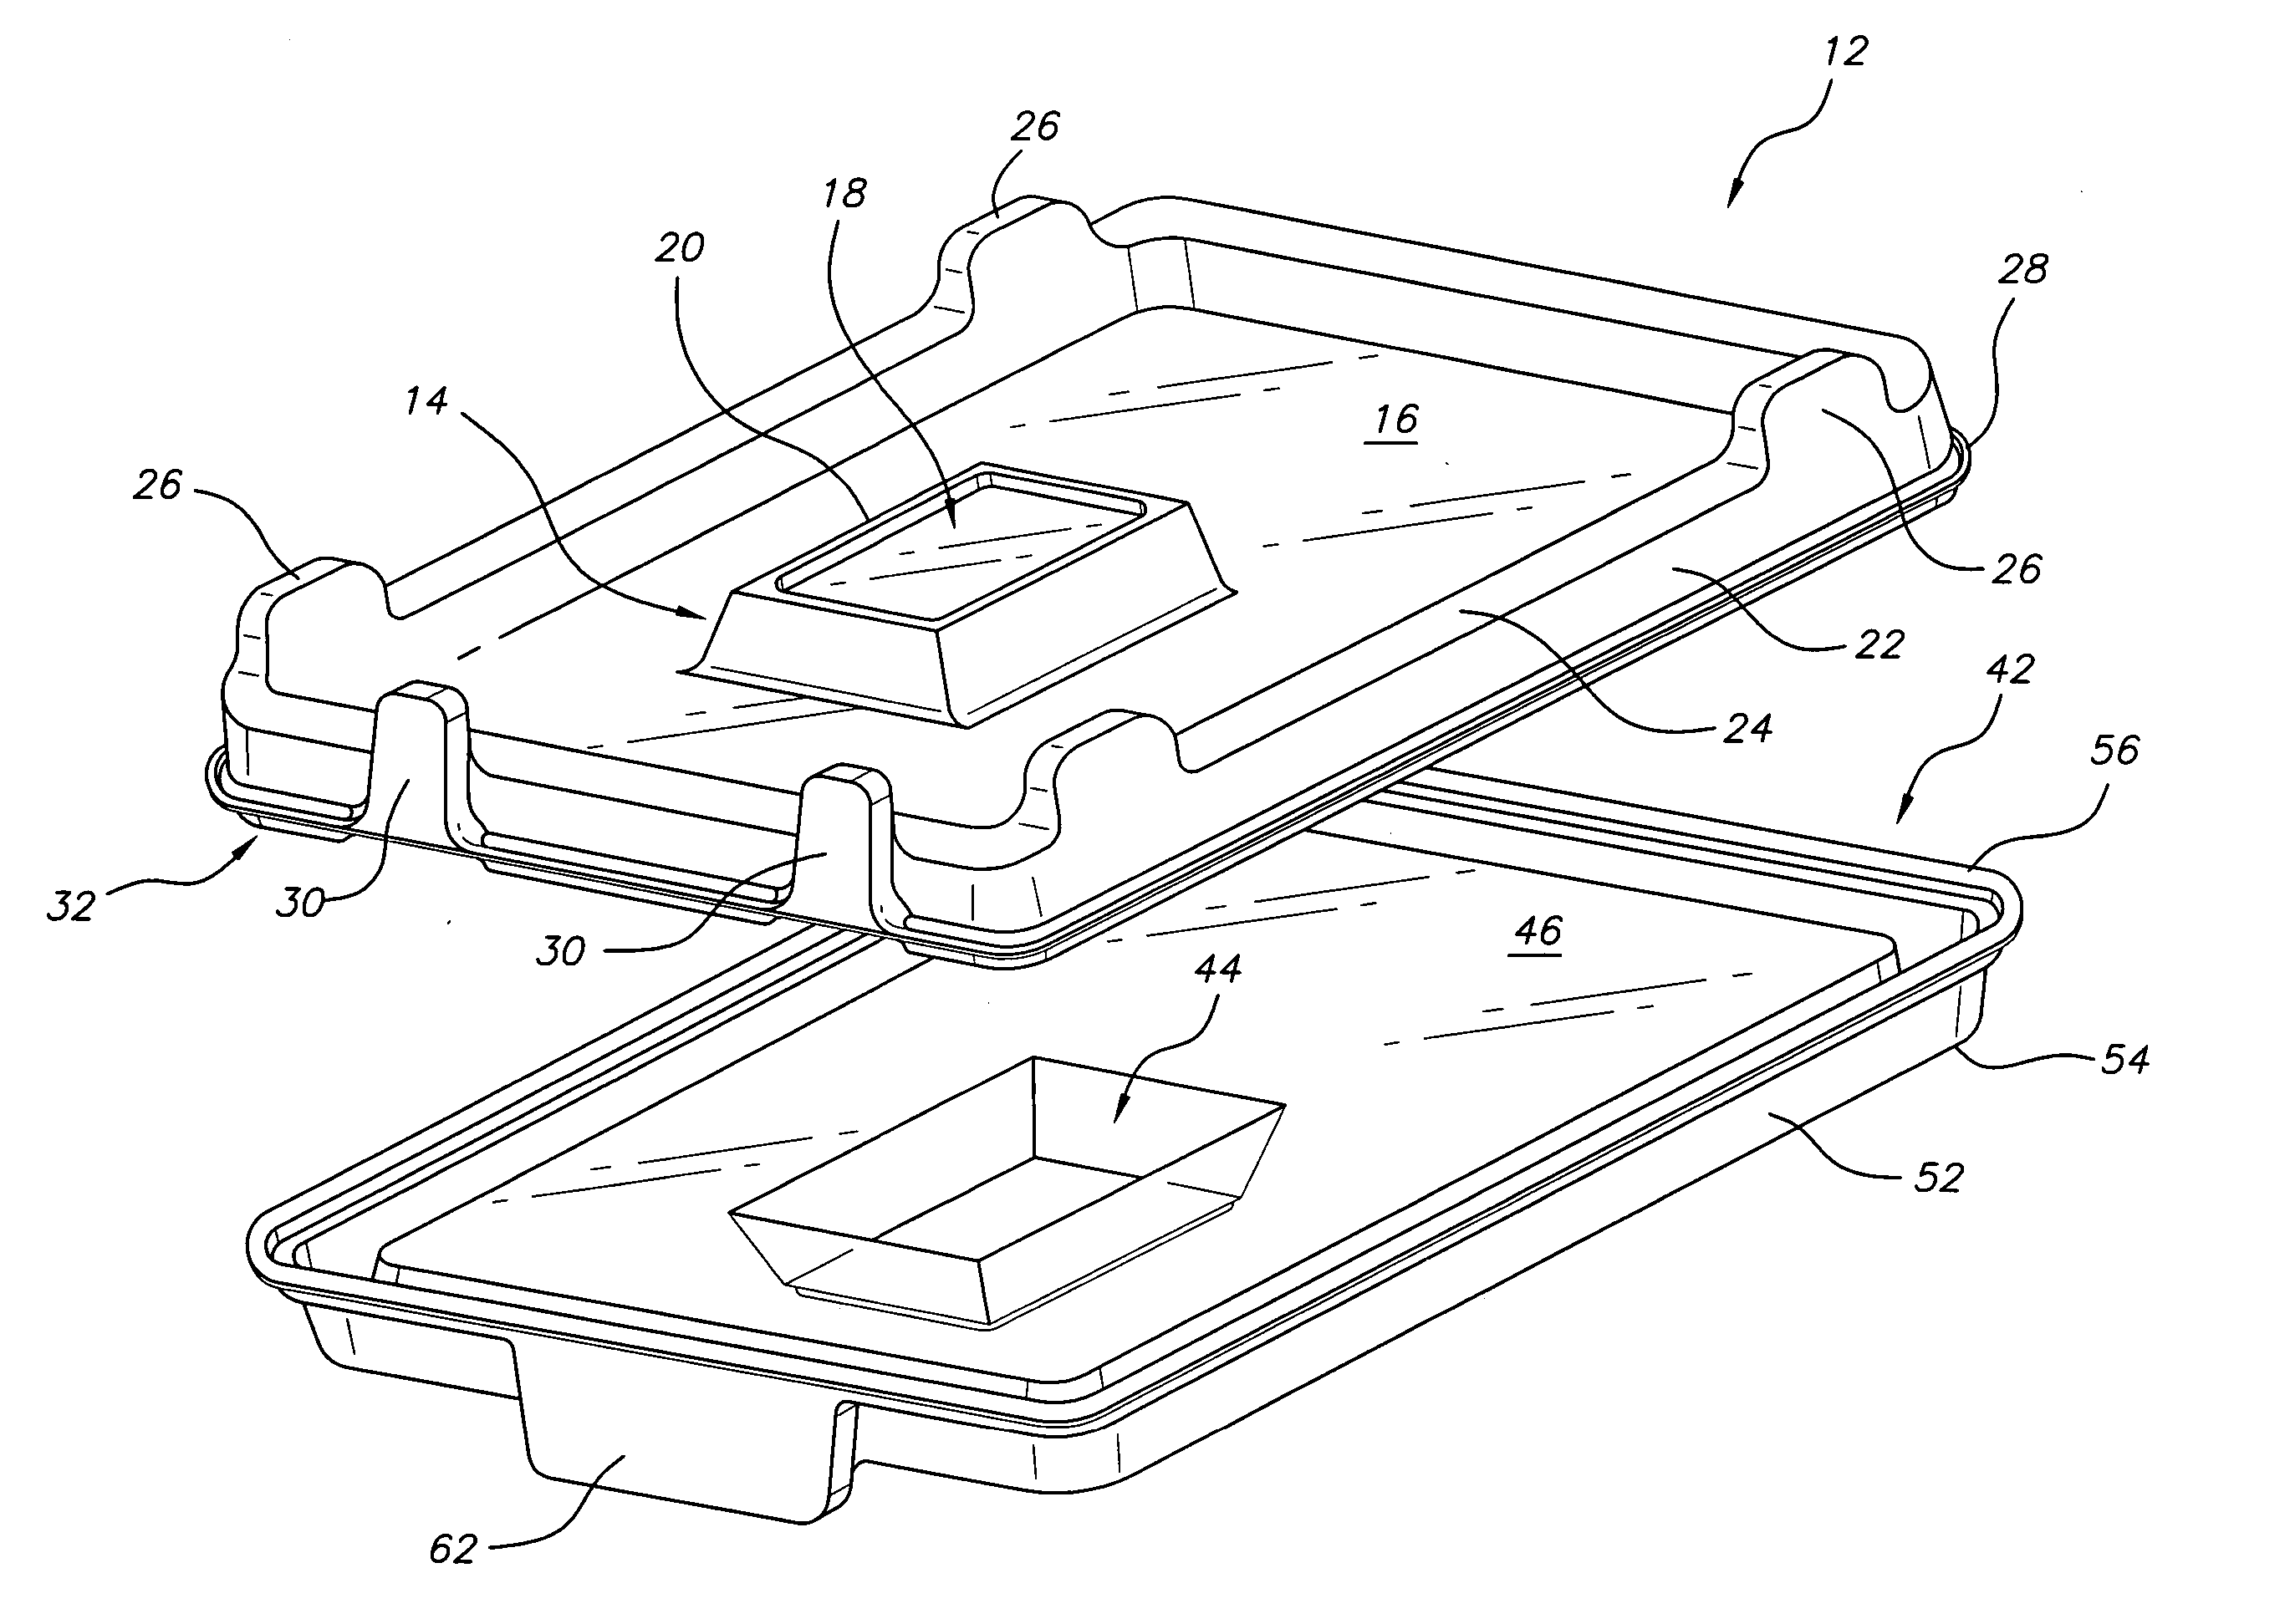 Interconnectable display packages and shipping system